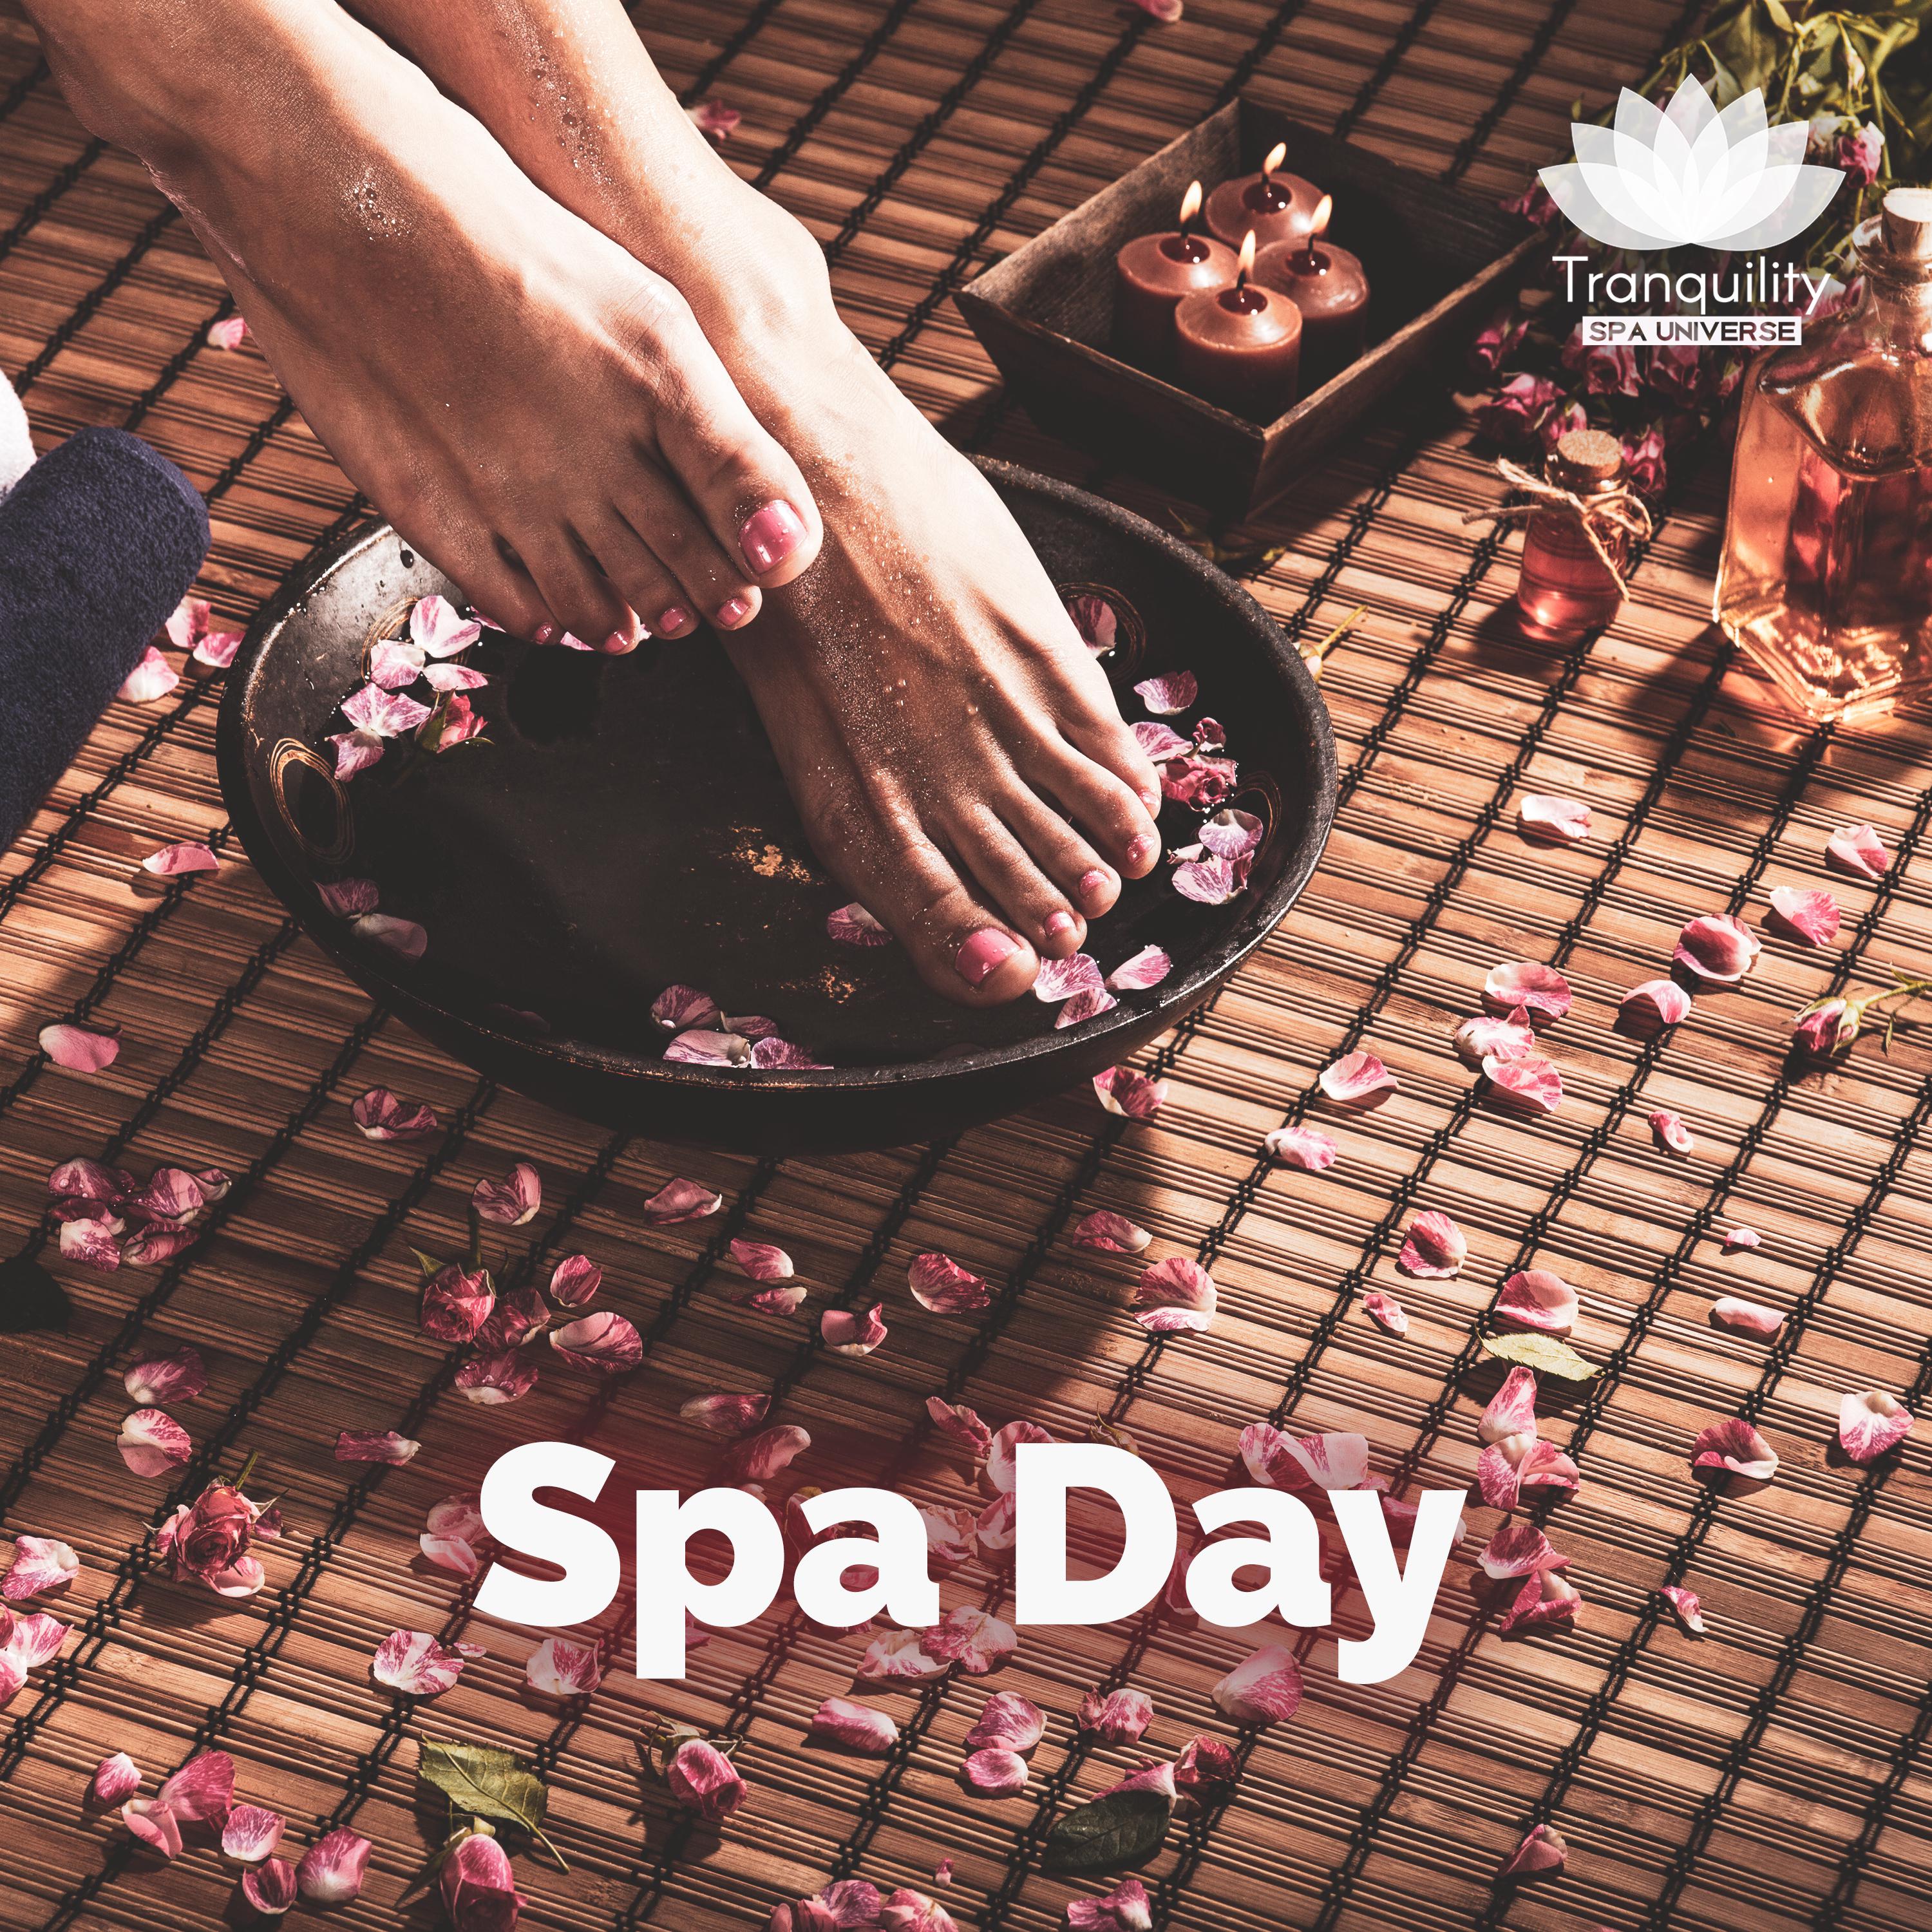 Spa Day (The Best Rest Ever, Special Music Collection for Your Total Relax & Enjoyment)